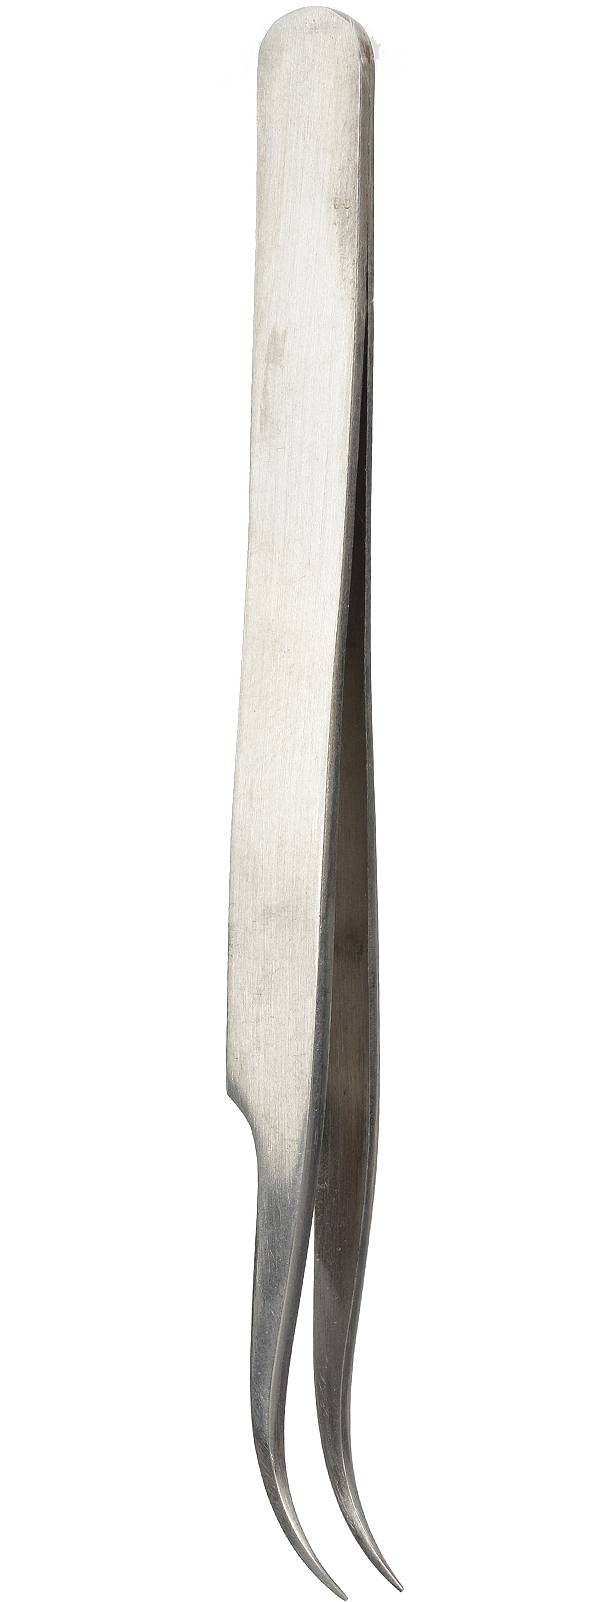 Perfect Hatch Curved Tweezers product image